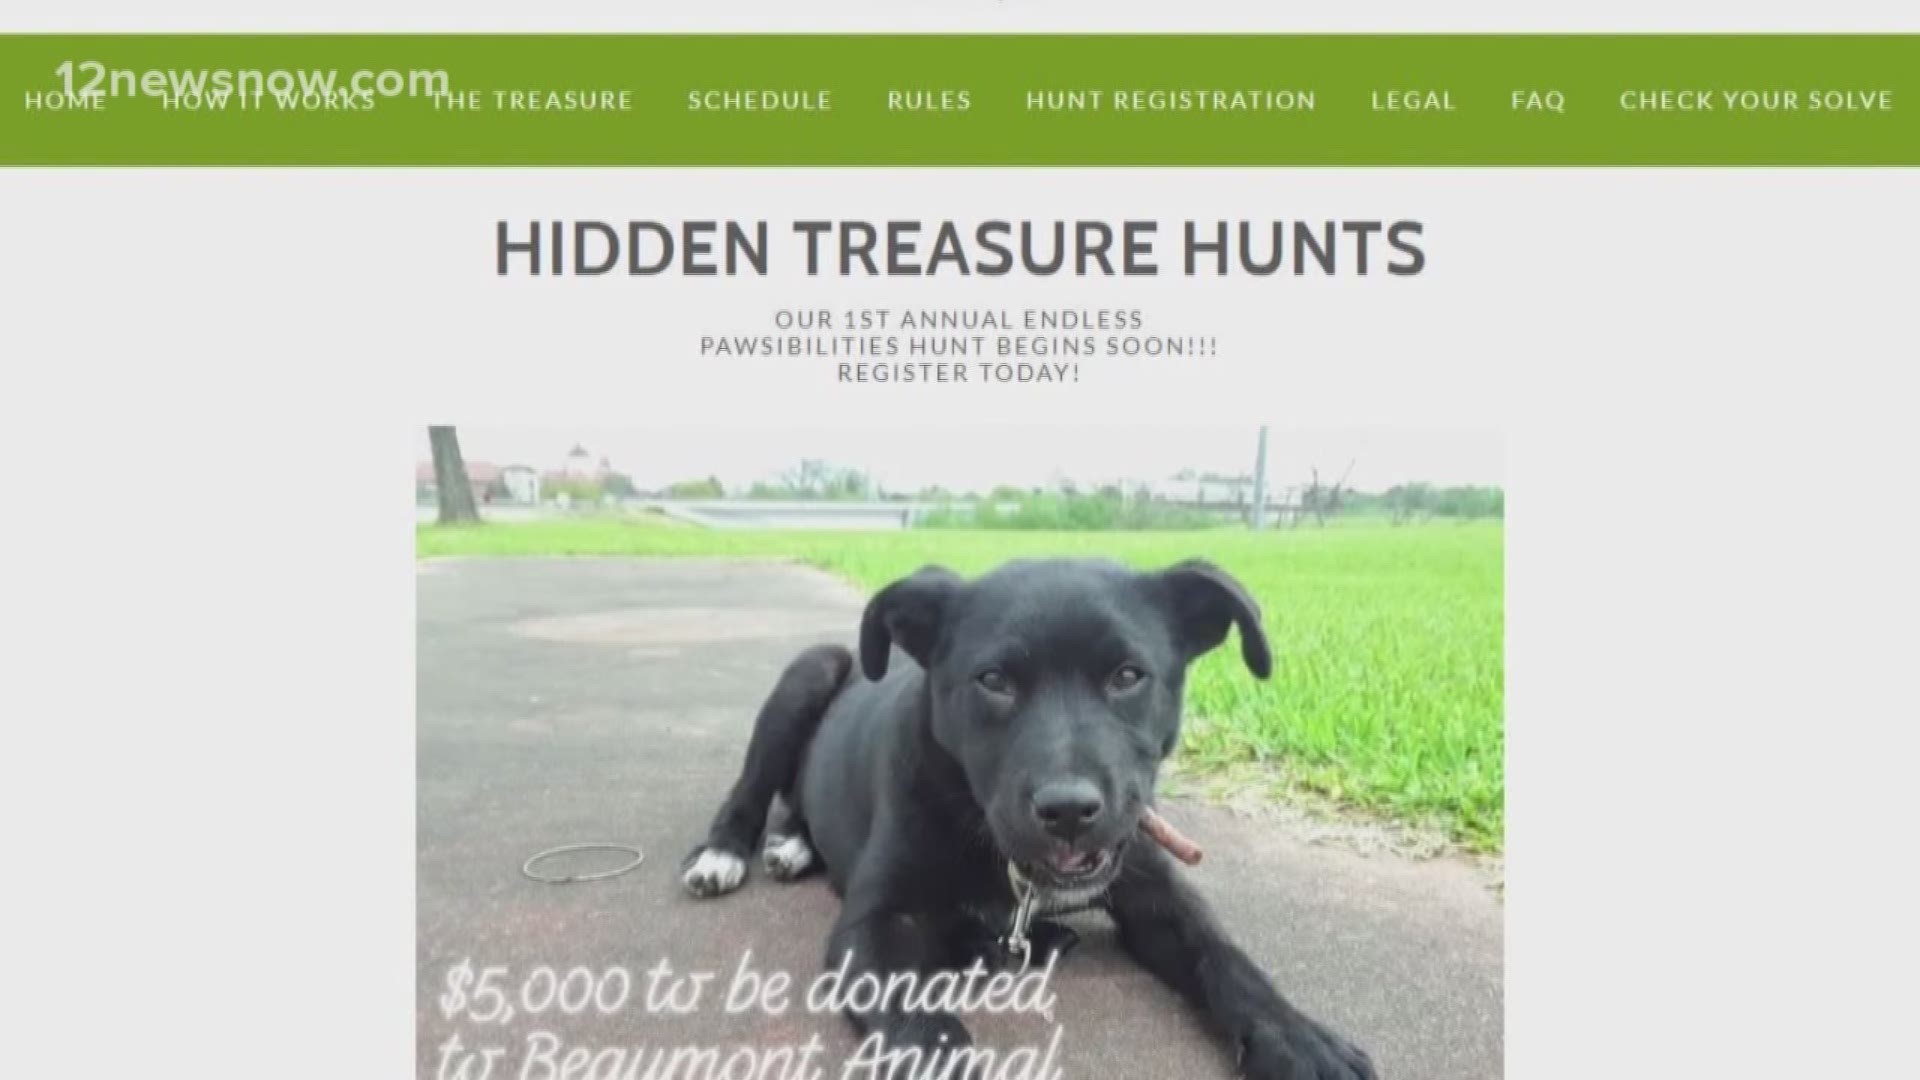 In the future, the treasure hunts will support a different local charities.